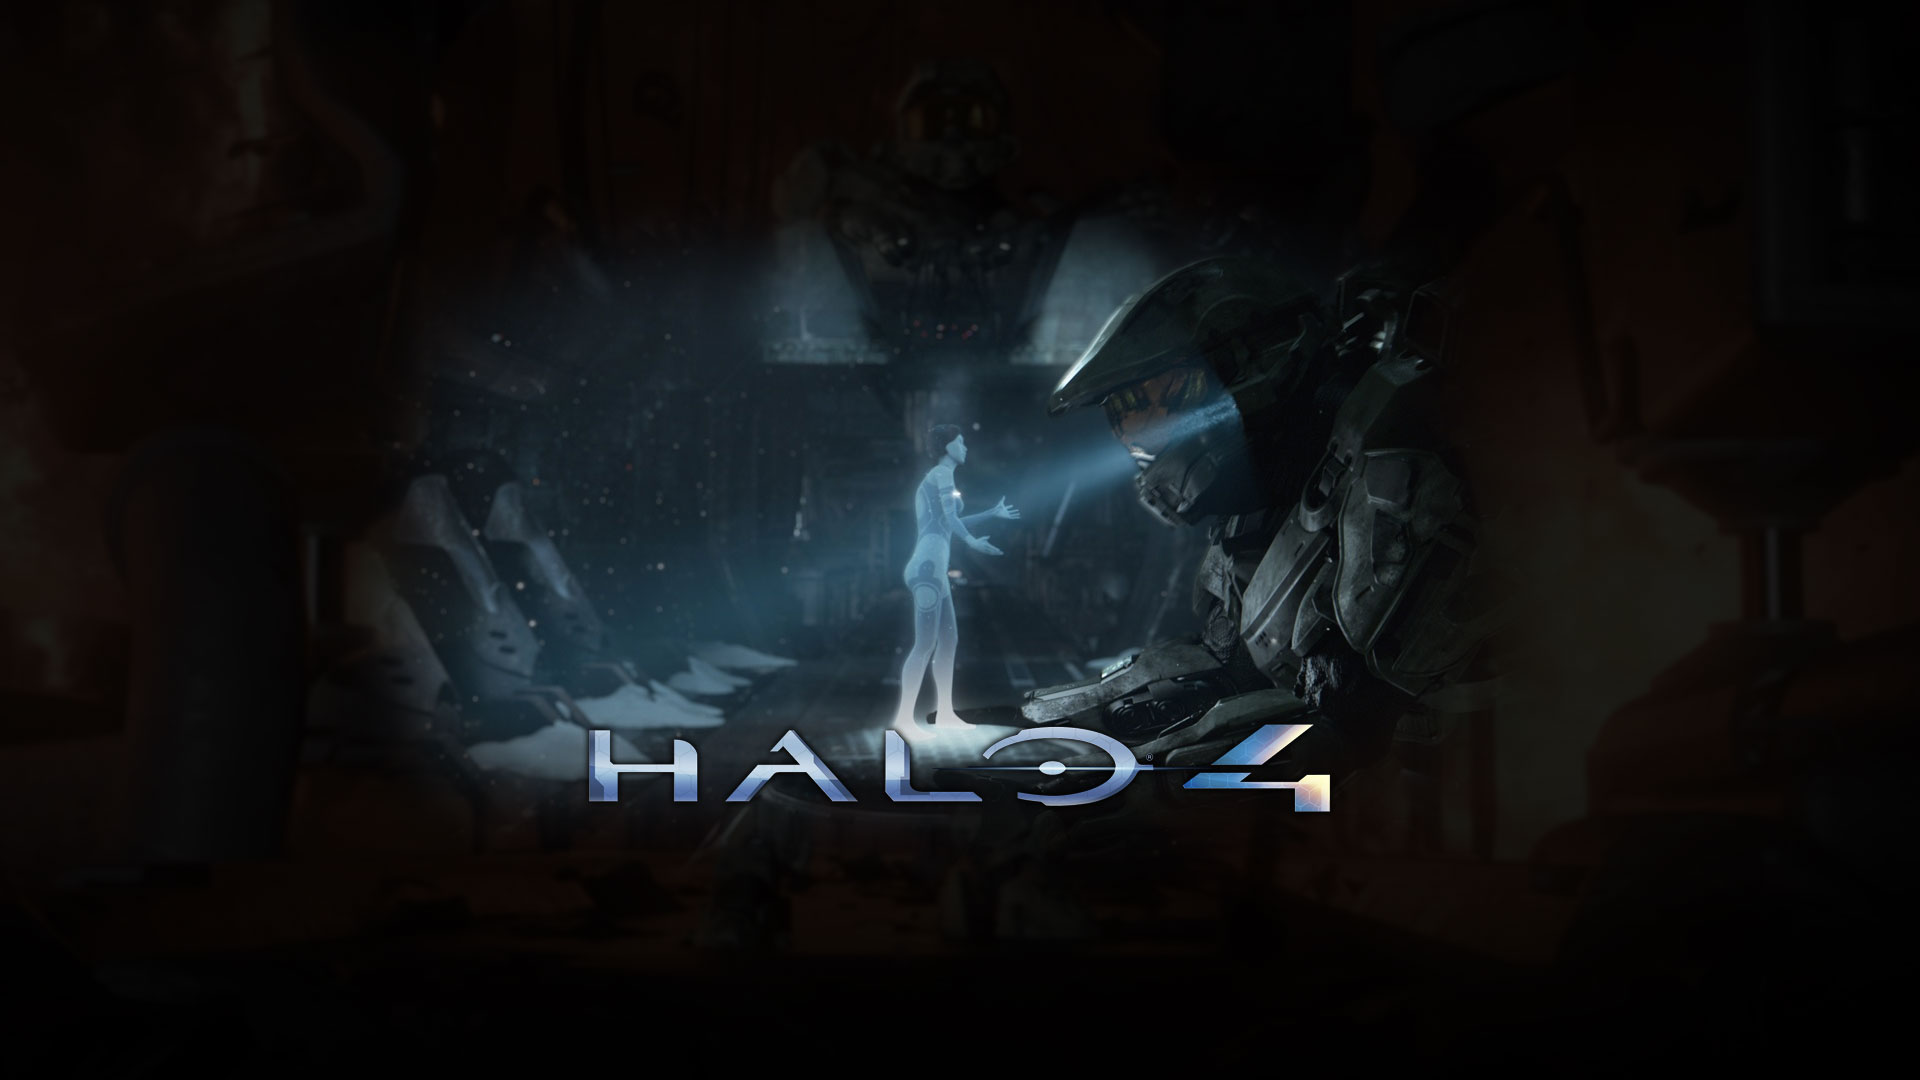 Halo 4 Wallpapers some in 1080p HD